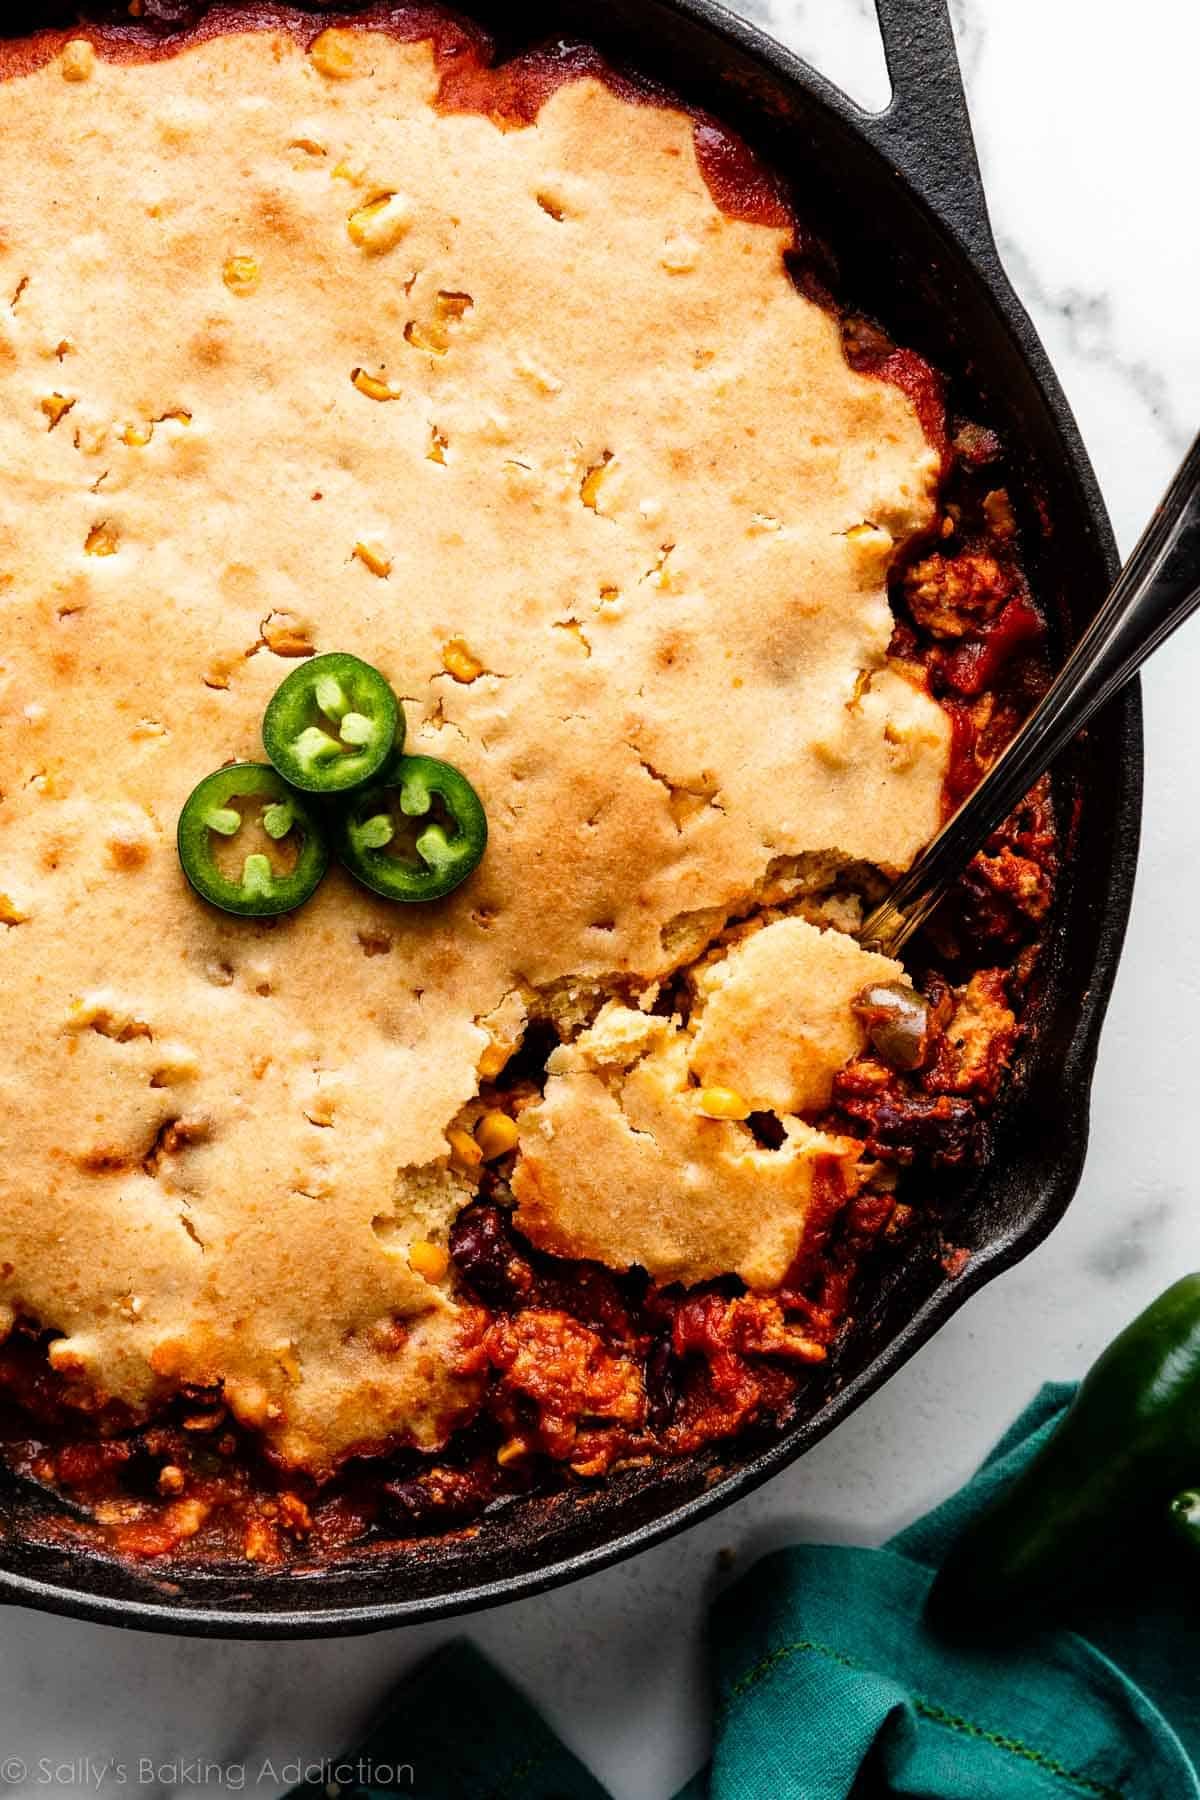 serving spoon spooning cornbread chili casserole out of a black cast iron skillet.